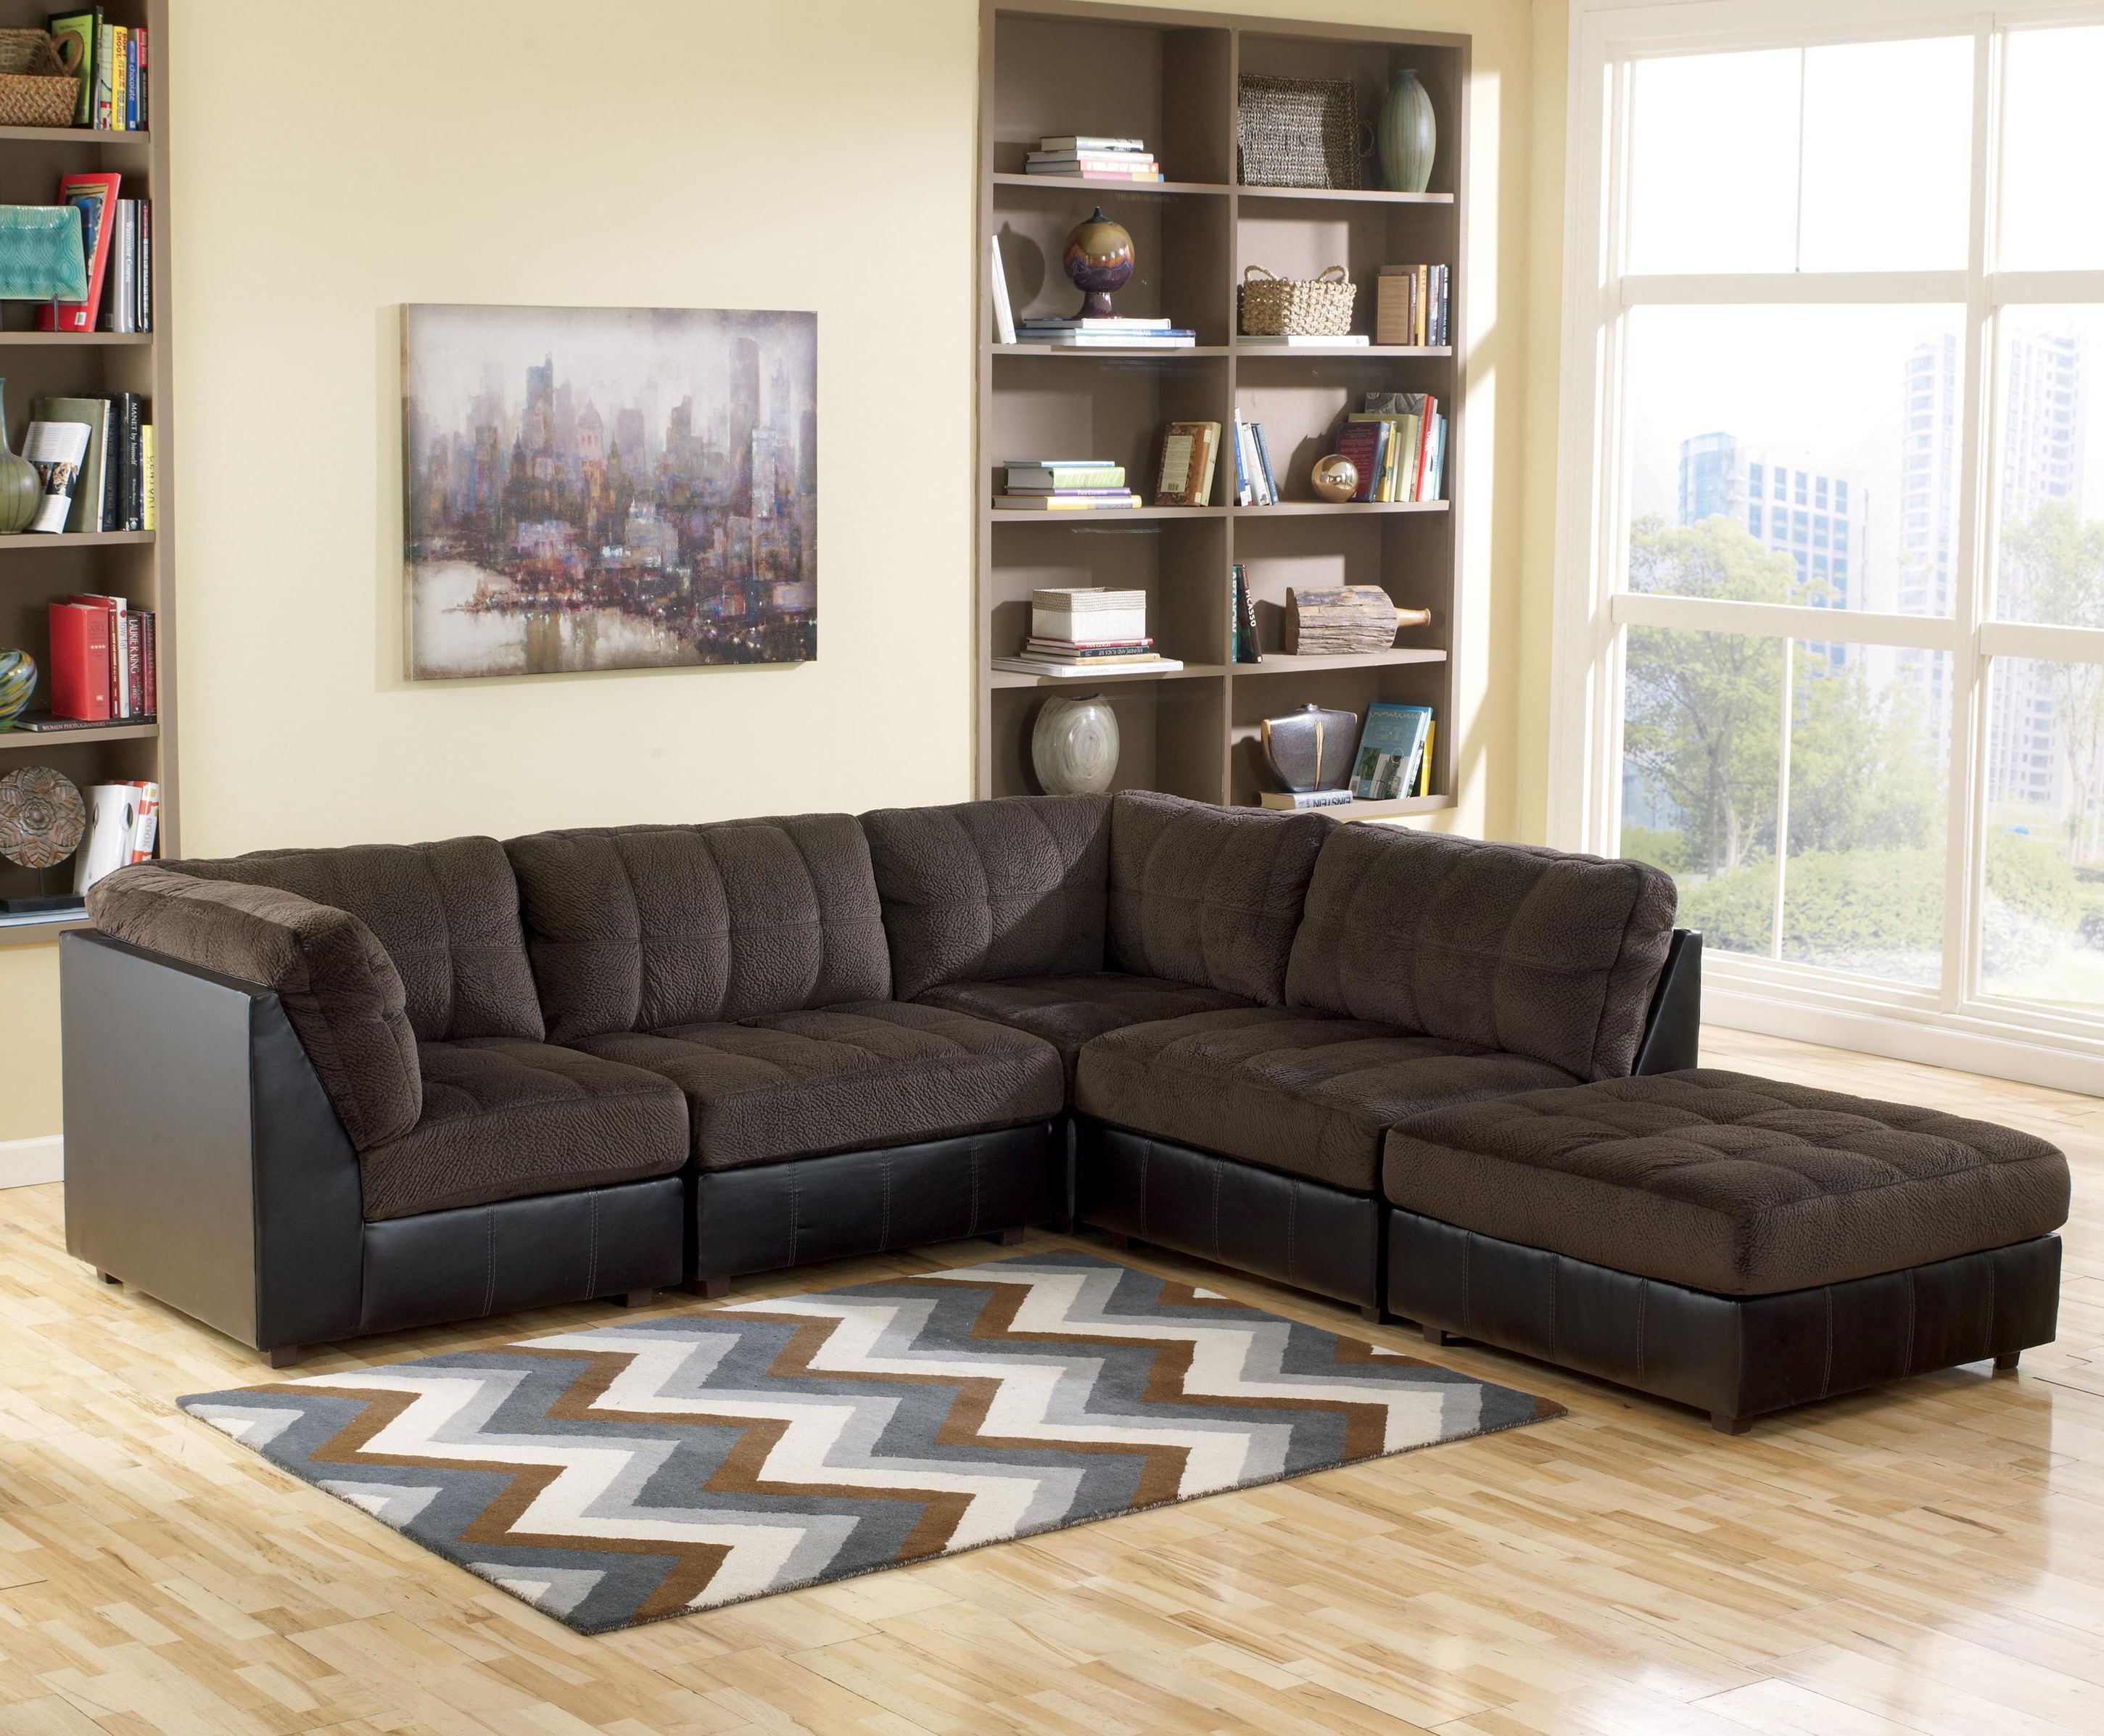 2018 Signature Designashley Hobokin – Chocolate Contemporary 5 Piece For Norfolk Chocolate 3 Piece Sectionals With Laf Chaise (View 13 of 20)